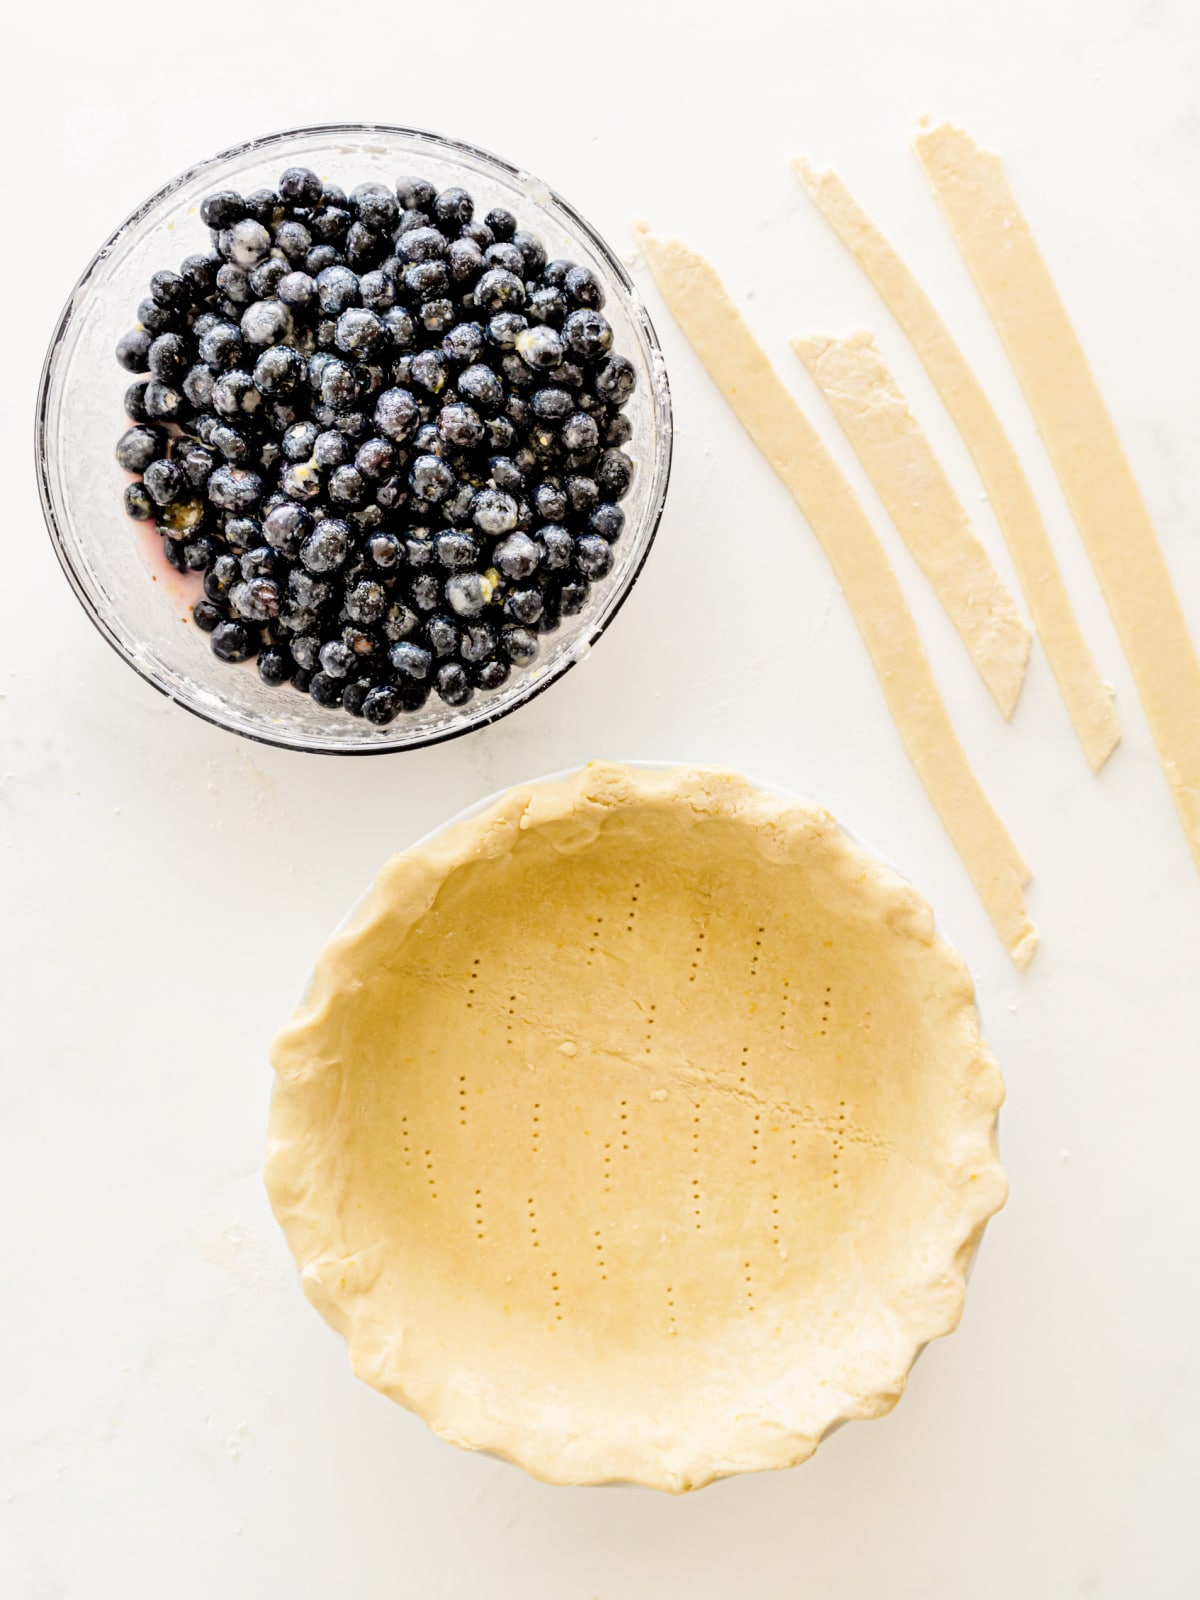 blueberry pie crust ready to fill